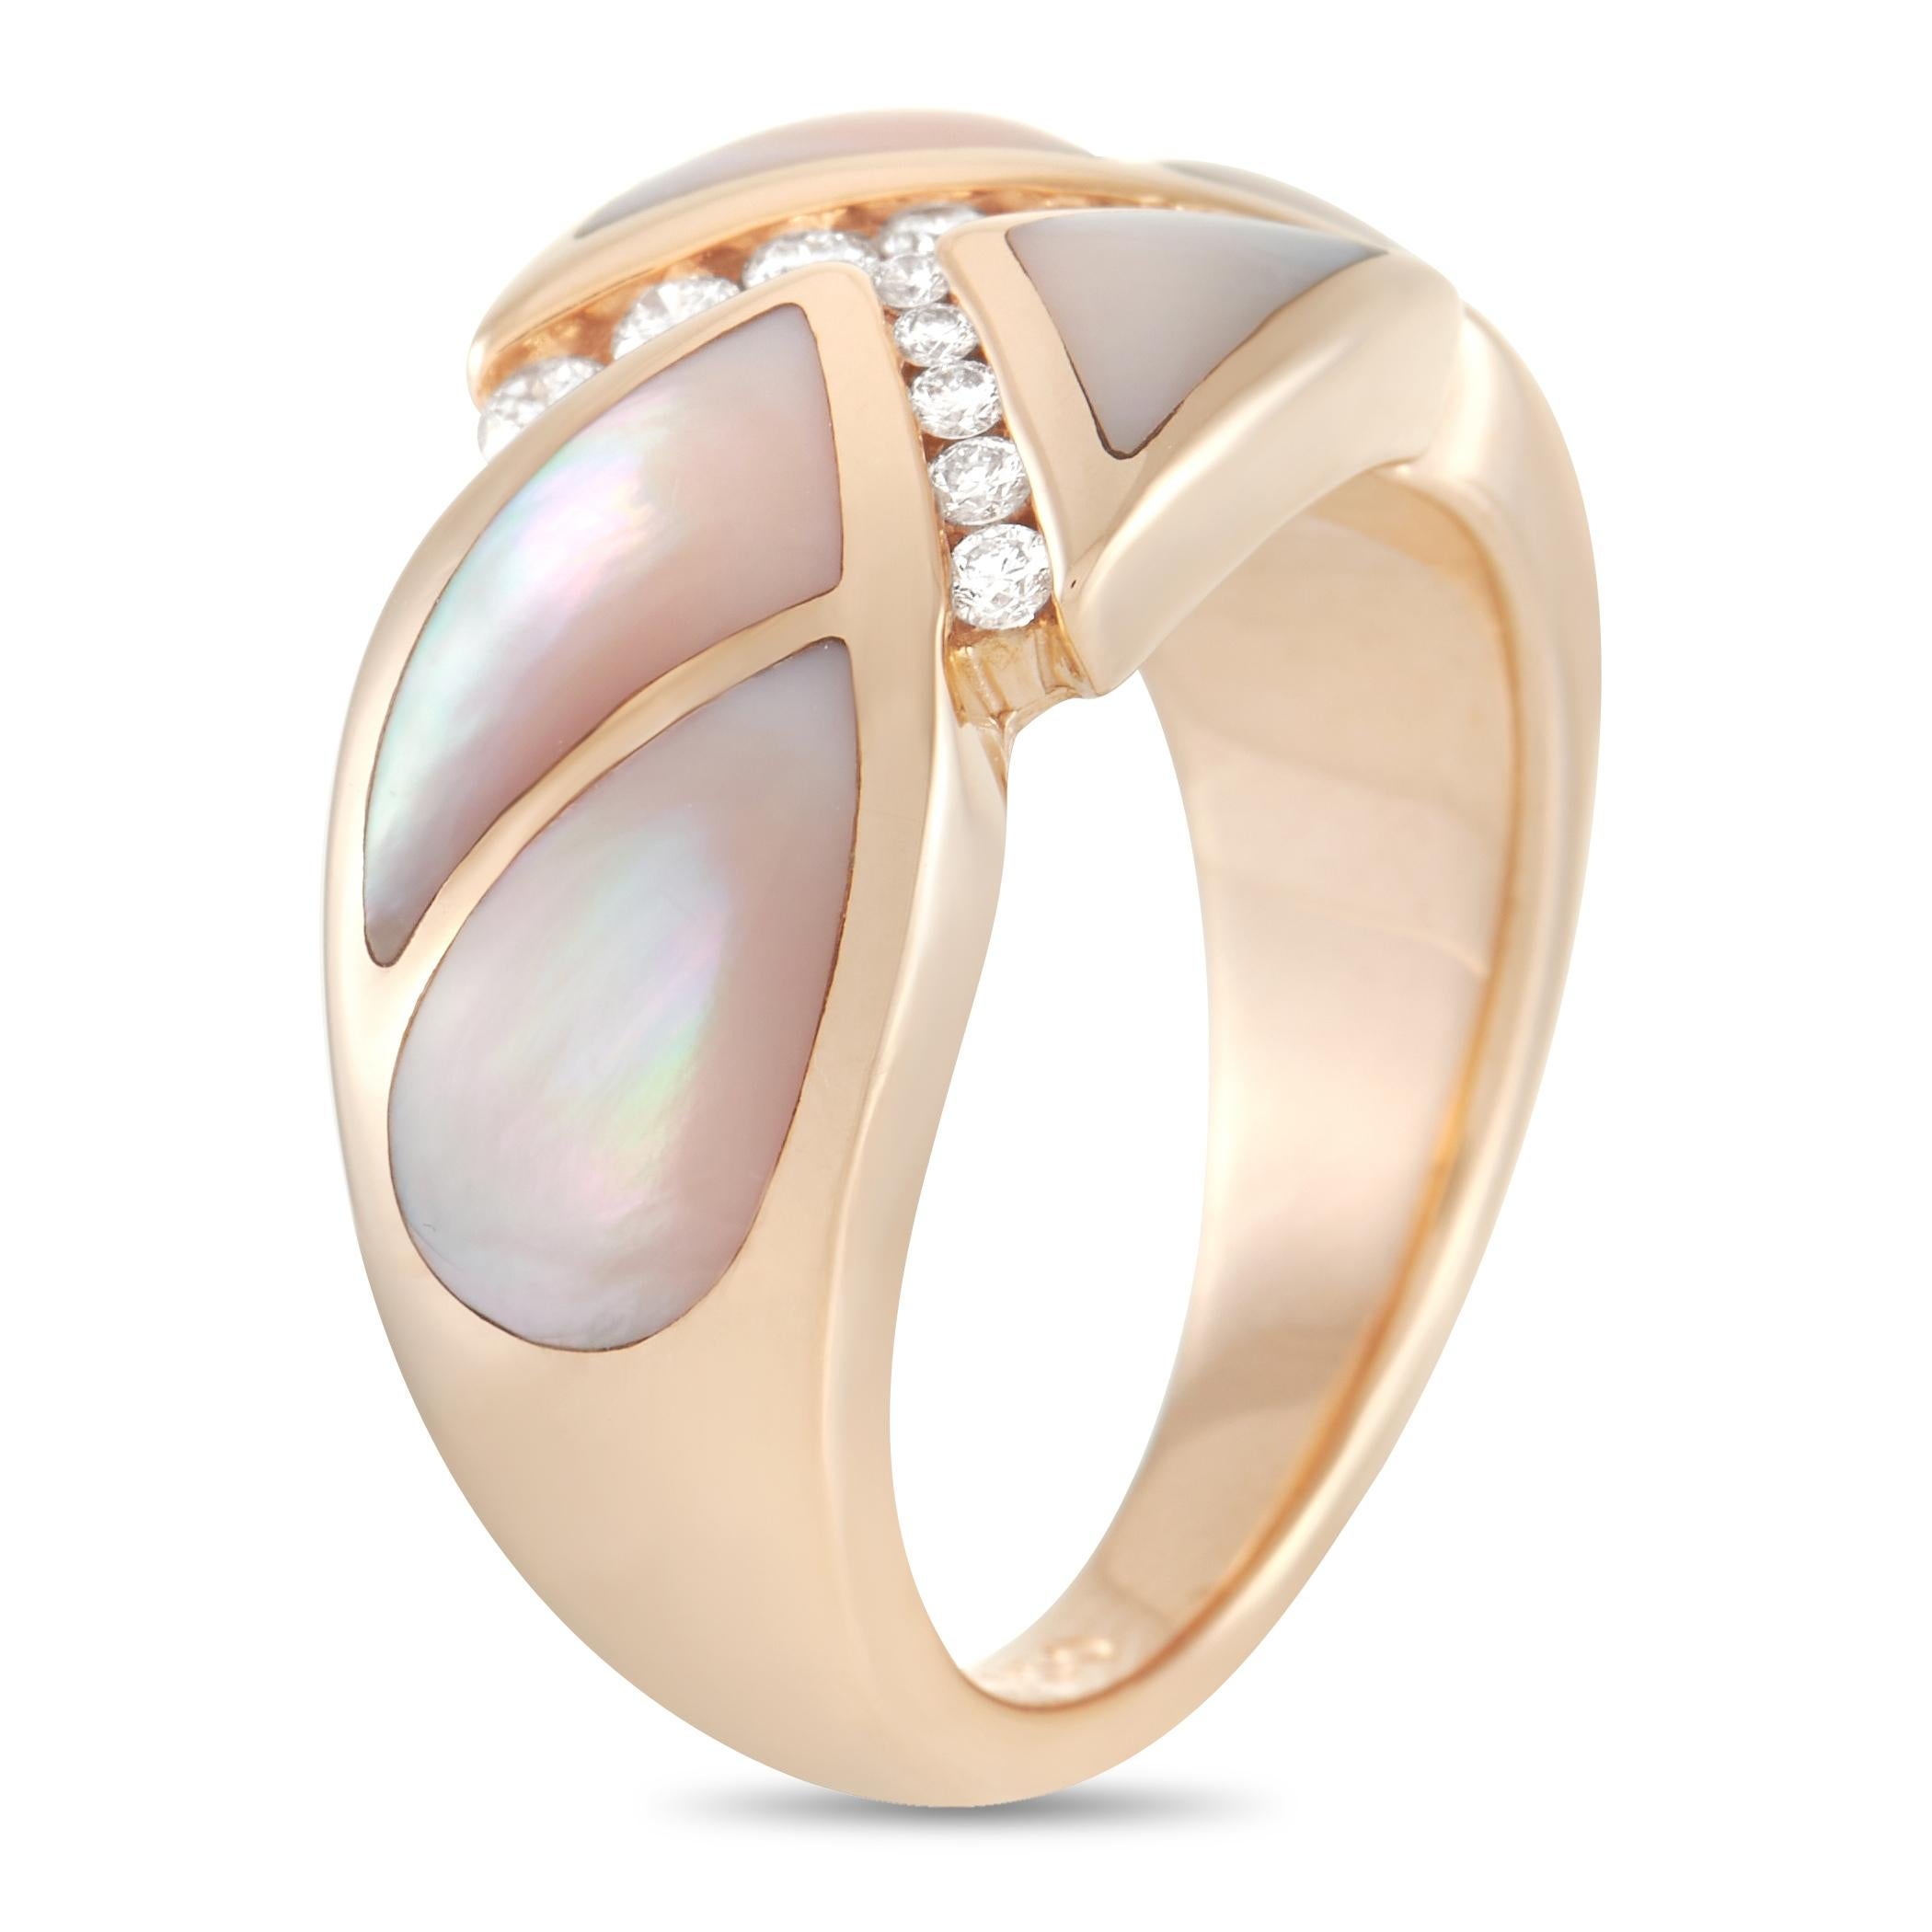 This lovely Kabana ring is pretty in pink. The simple band is made with 14K rose gold and set with an inlay of soft pink mother of pearl in a unique geometric design. The face of the ring is set with a row of round diamonds totaling 0.23 carats. The